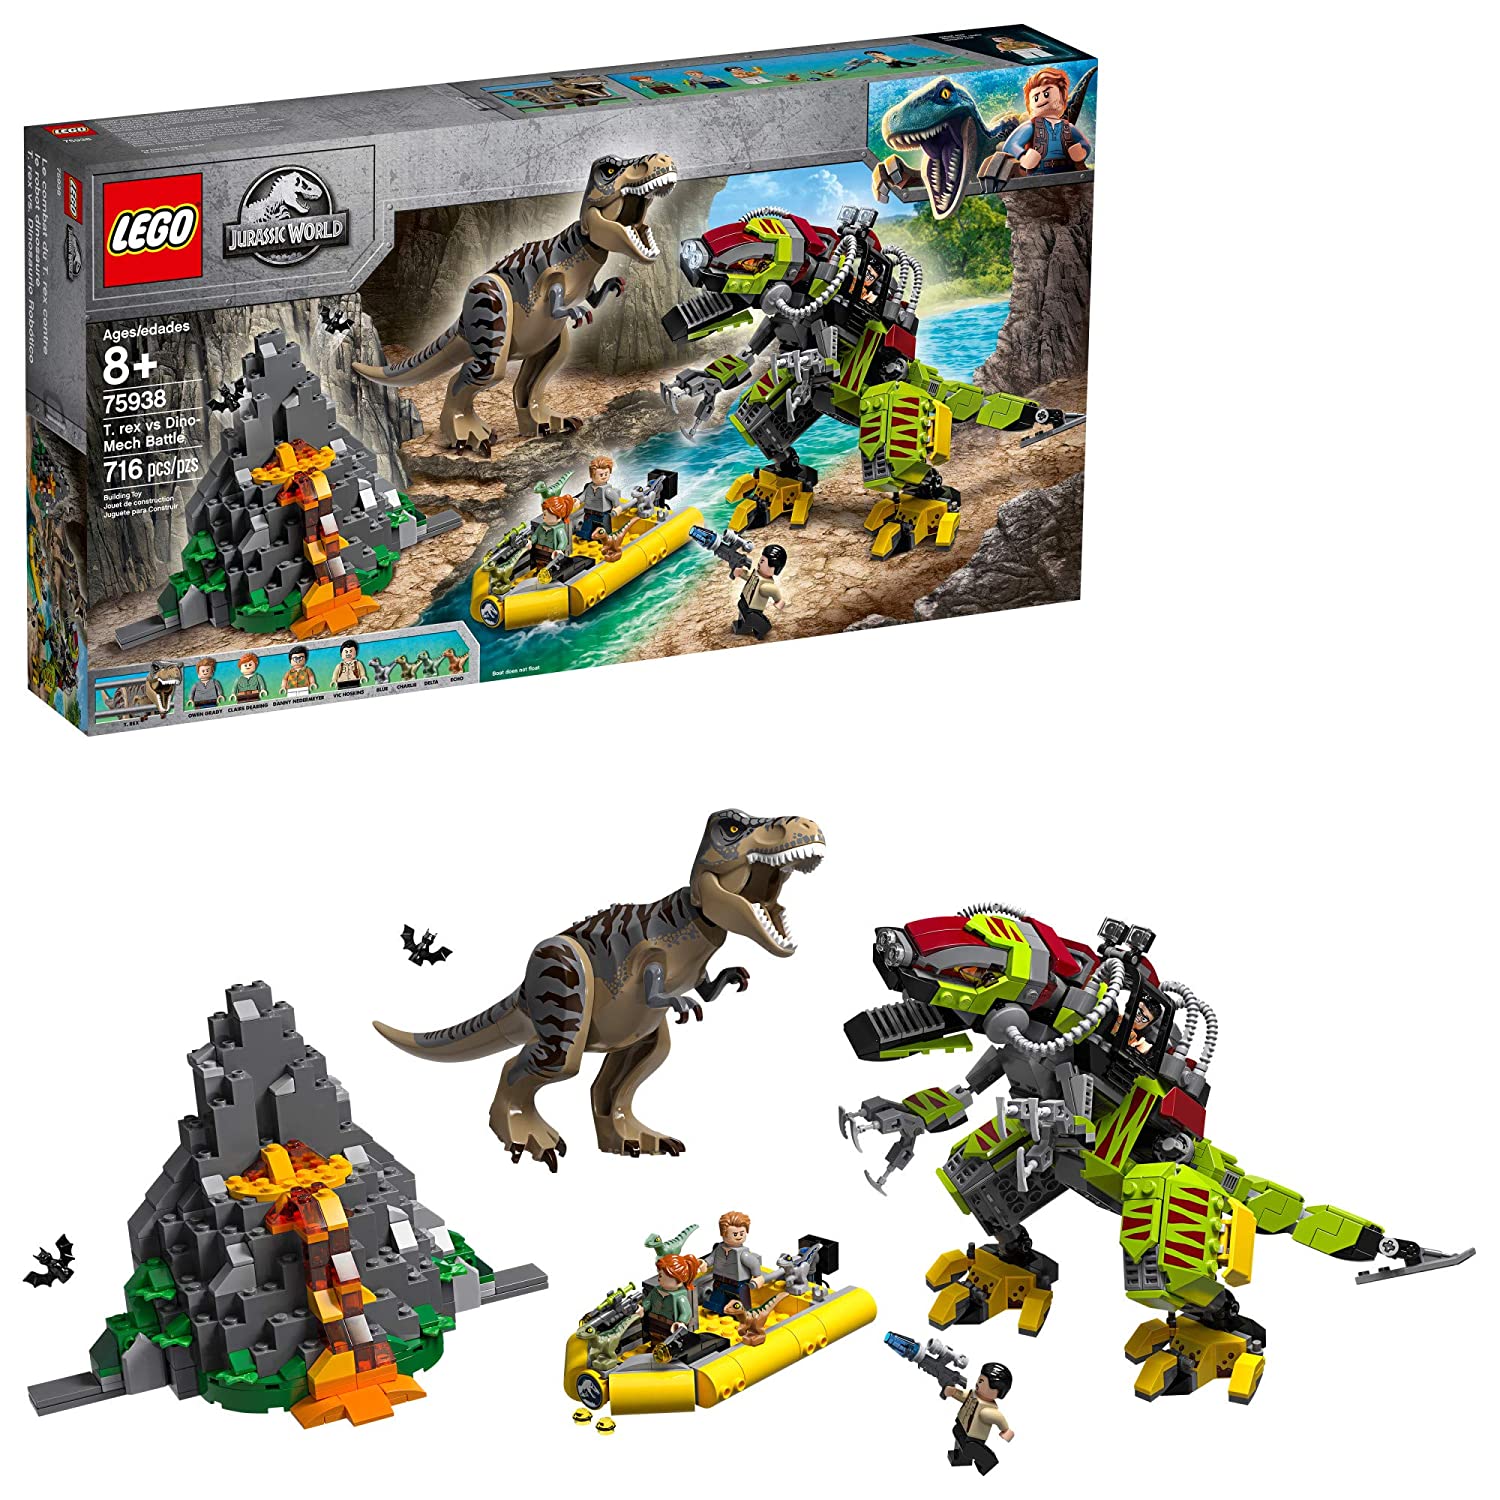 Top 8 Best Lego Dinosaurs Set Reviews in 2023 7